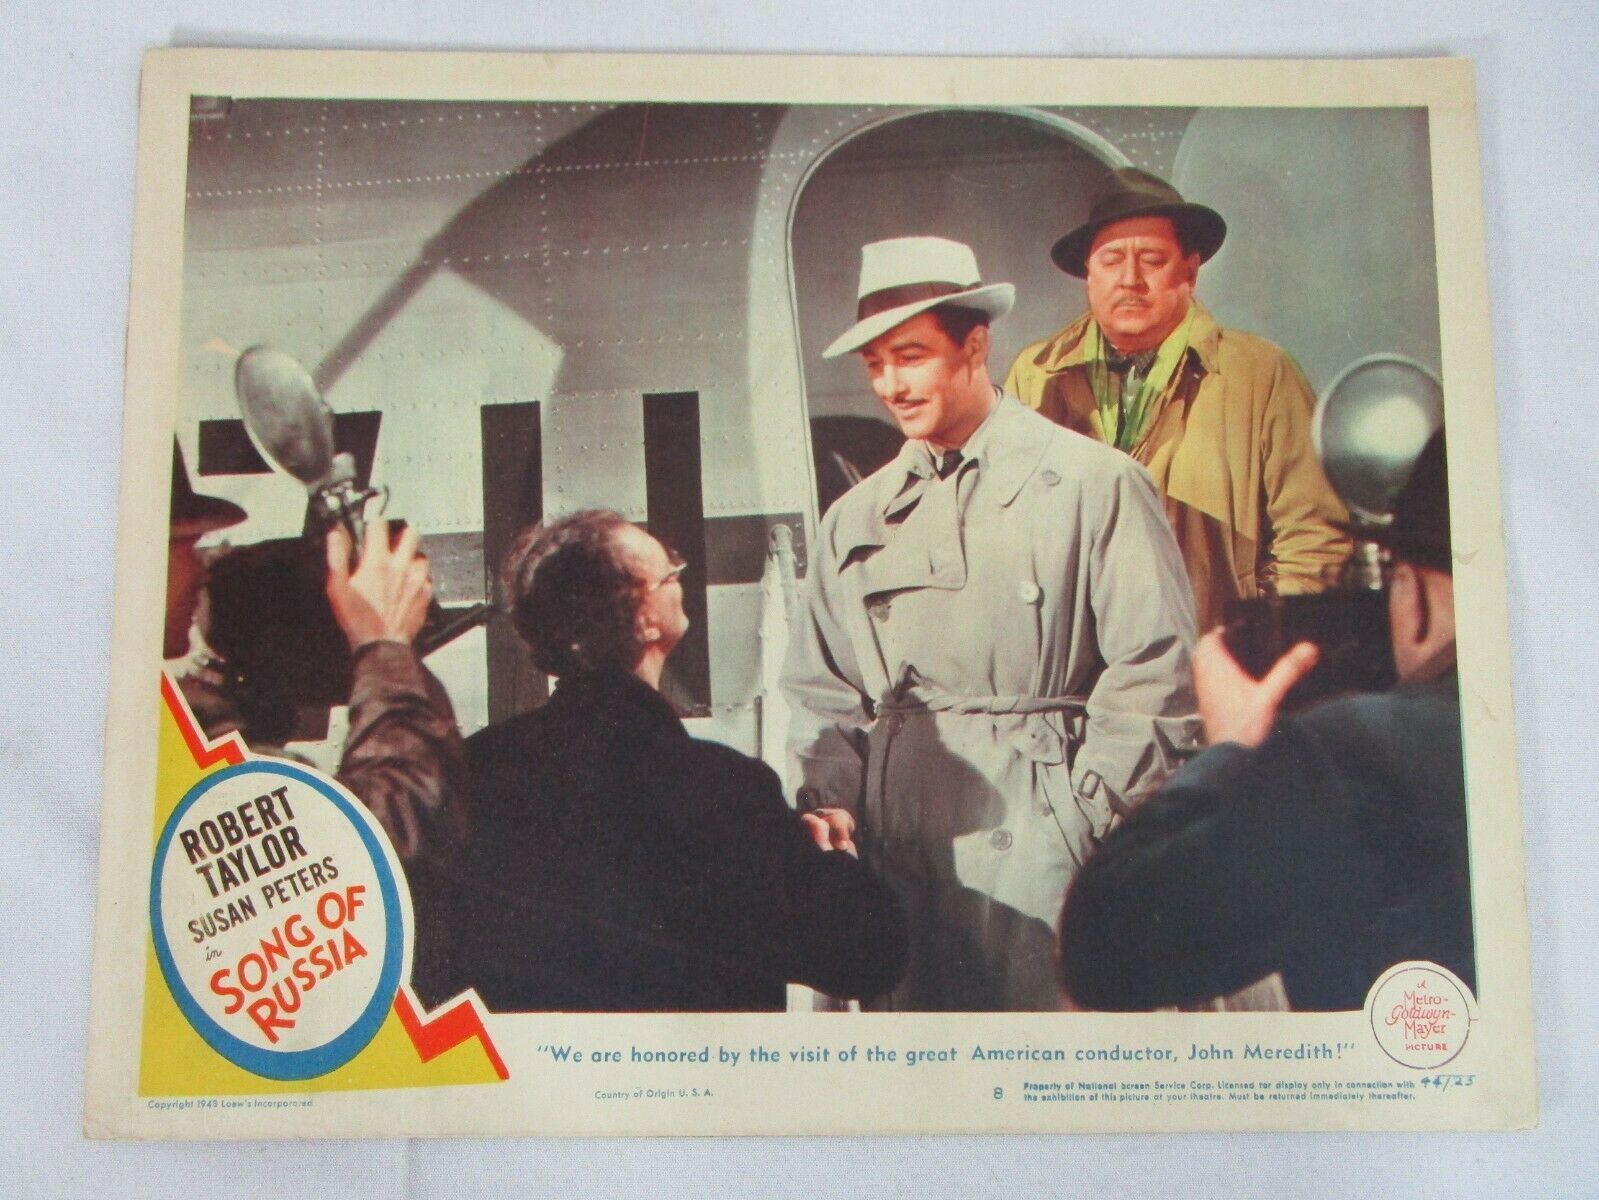 Primary image for SONG OF RUSSIA Vintage 1943 Lobby Card Robert Taylor Susan Peters 11x14 #8